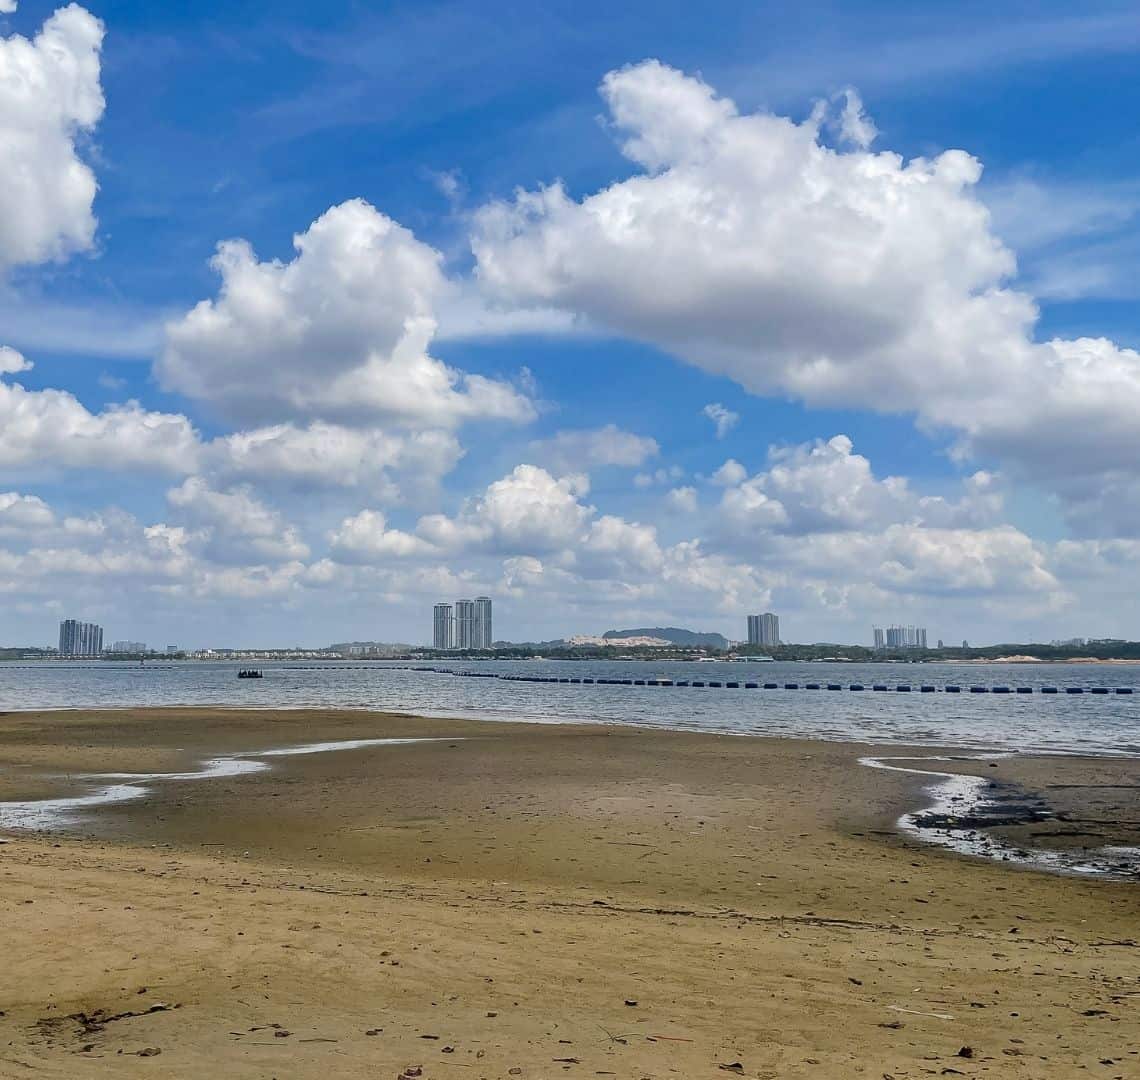 The sand on Sembawang beach is dark yellow with some green on it. It takes up around half of the photo. In the middle third is the sea with a book net running through it just off the shore. In the distance are some buildings including a few high rises. There are several white fluffy clouds in a blue sky